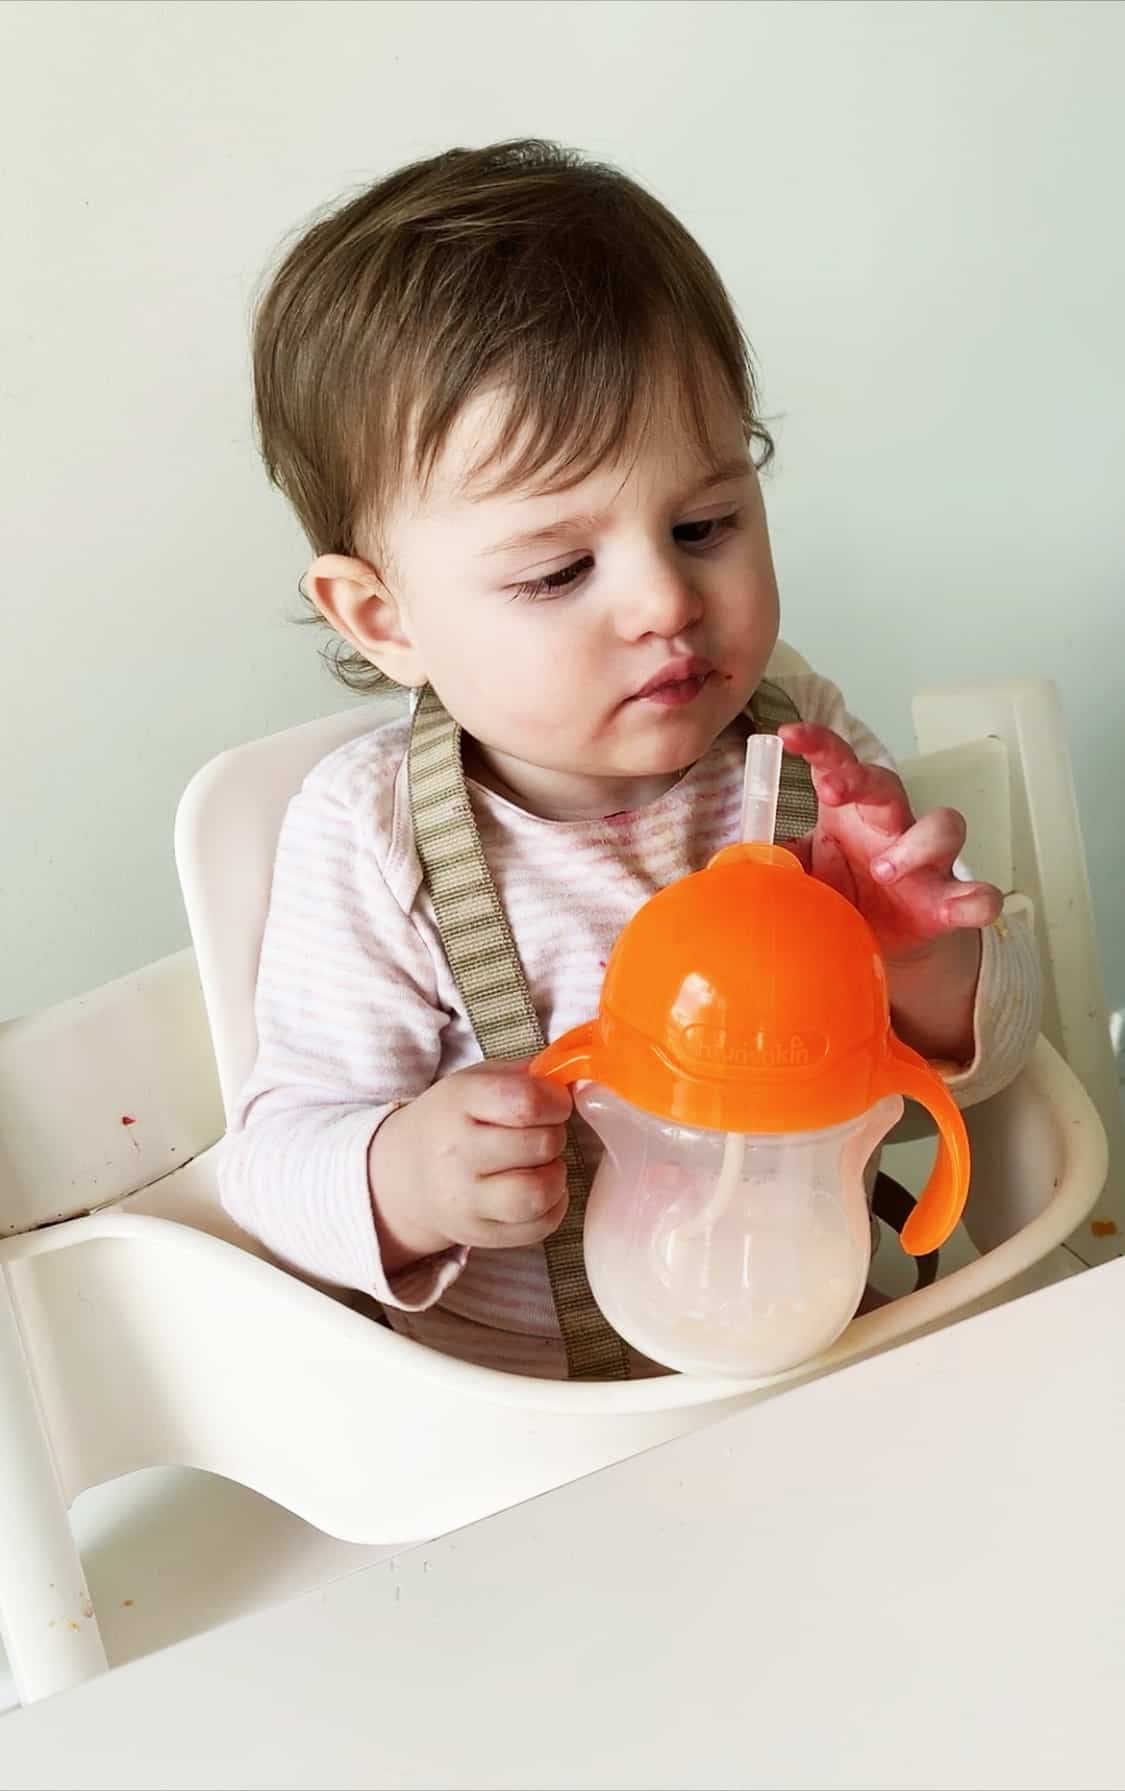 Discover our Baby and Toddler Cups